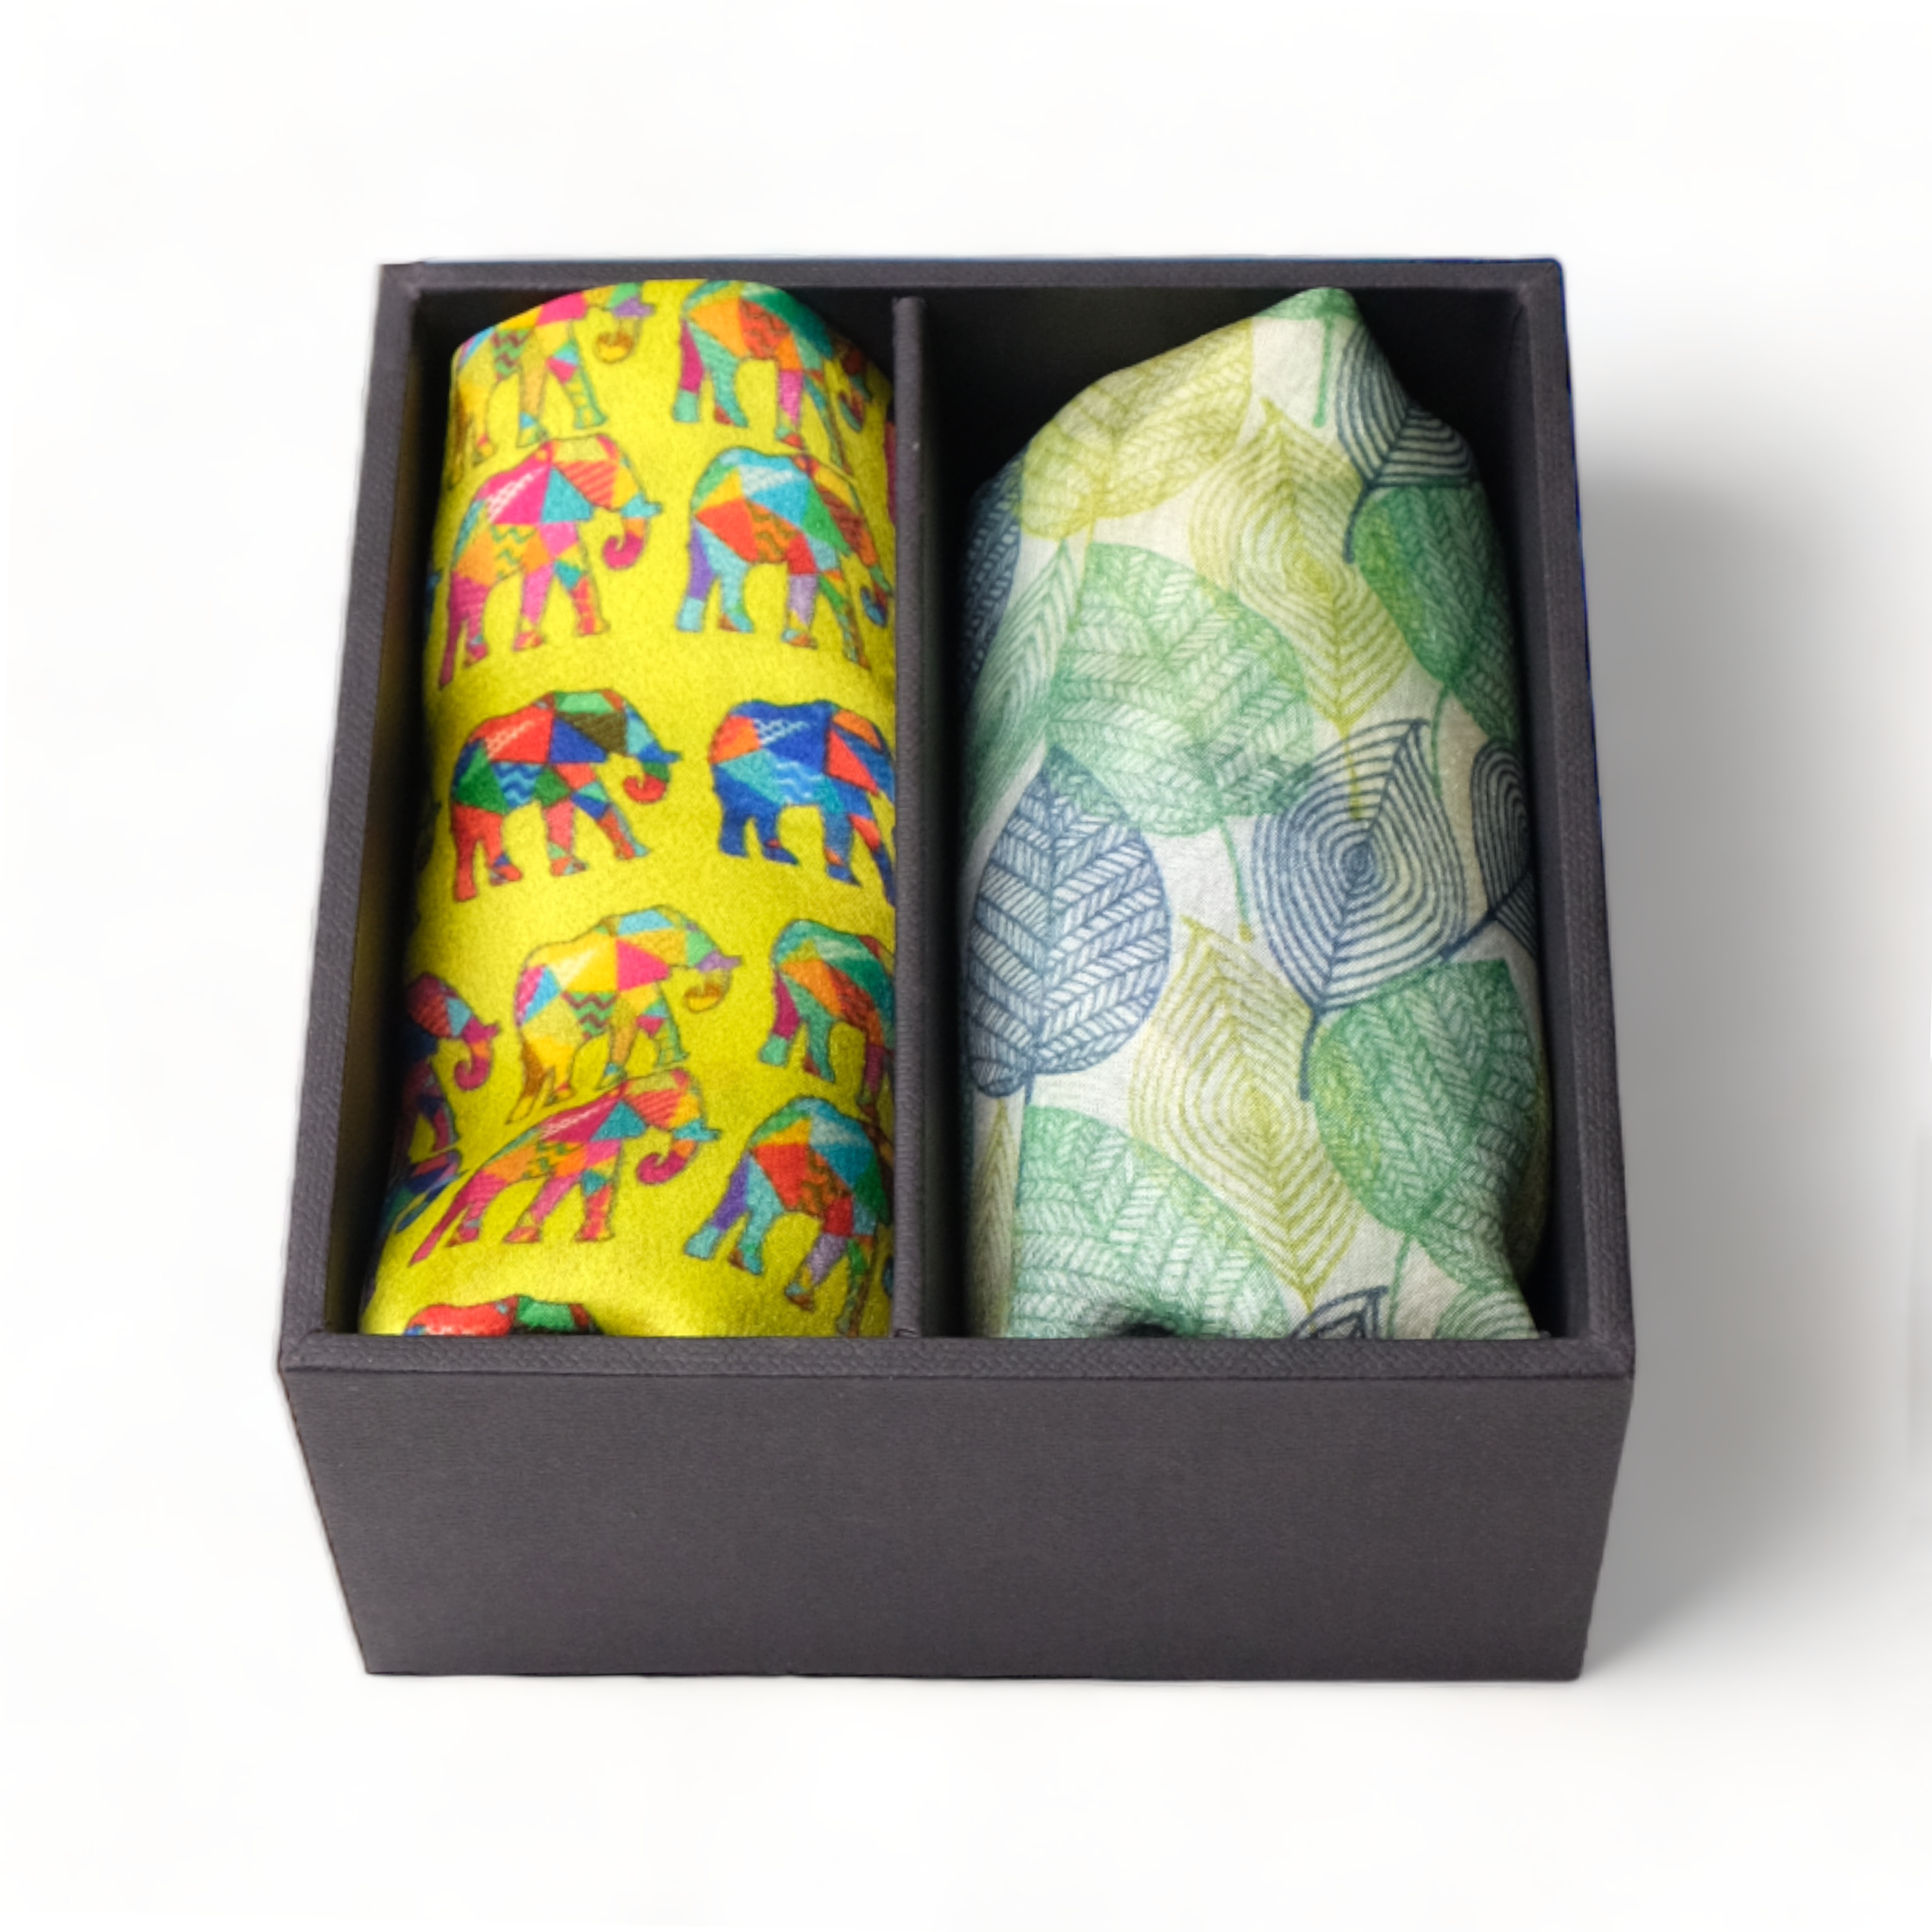 Chokore Special 2-in-1 Gift Set for Him & Her (Women’s Stole & Men’s Pocket Square)